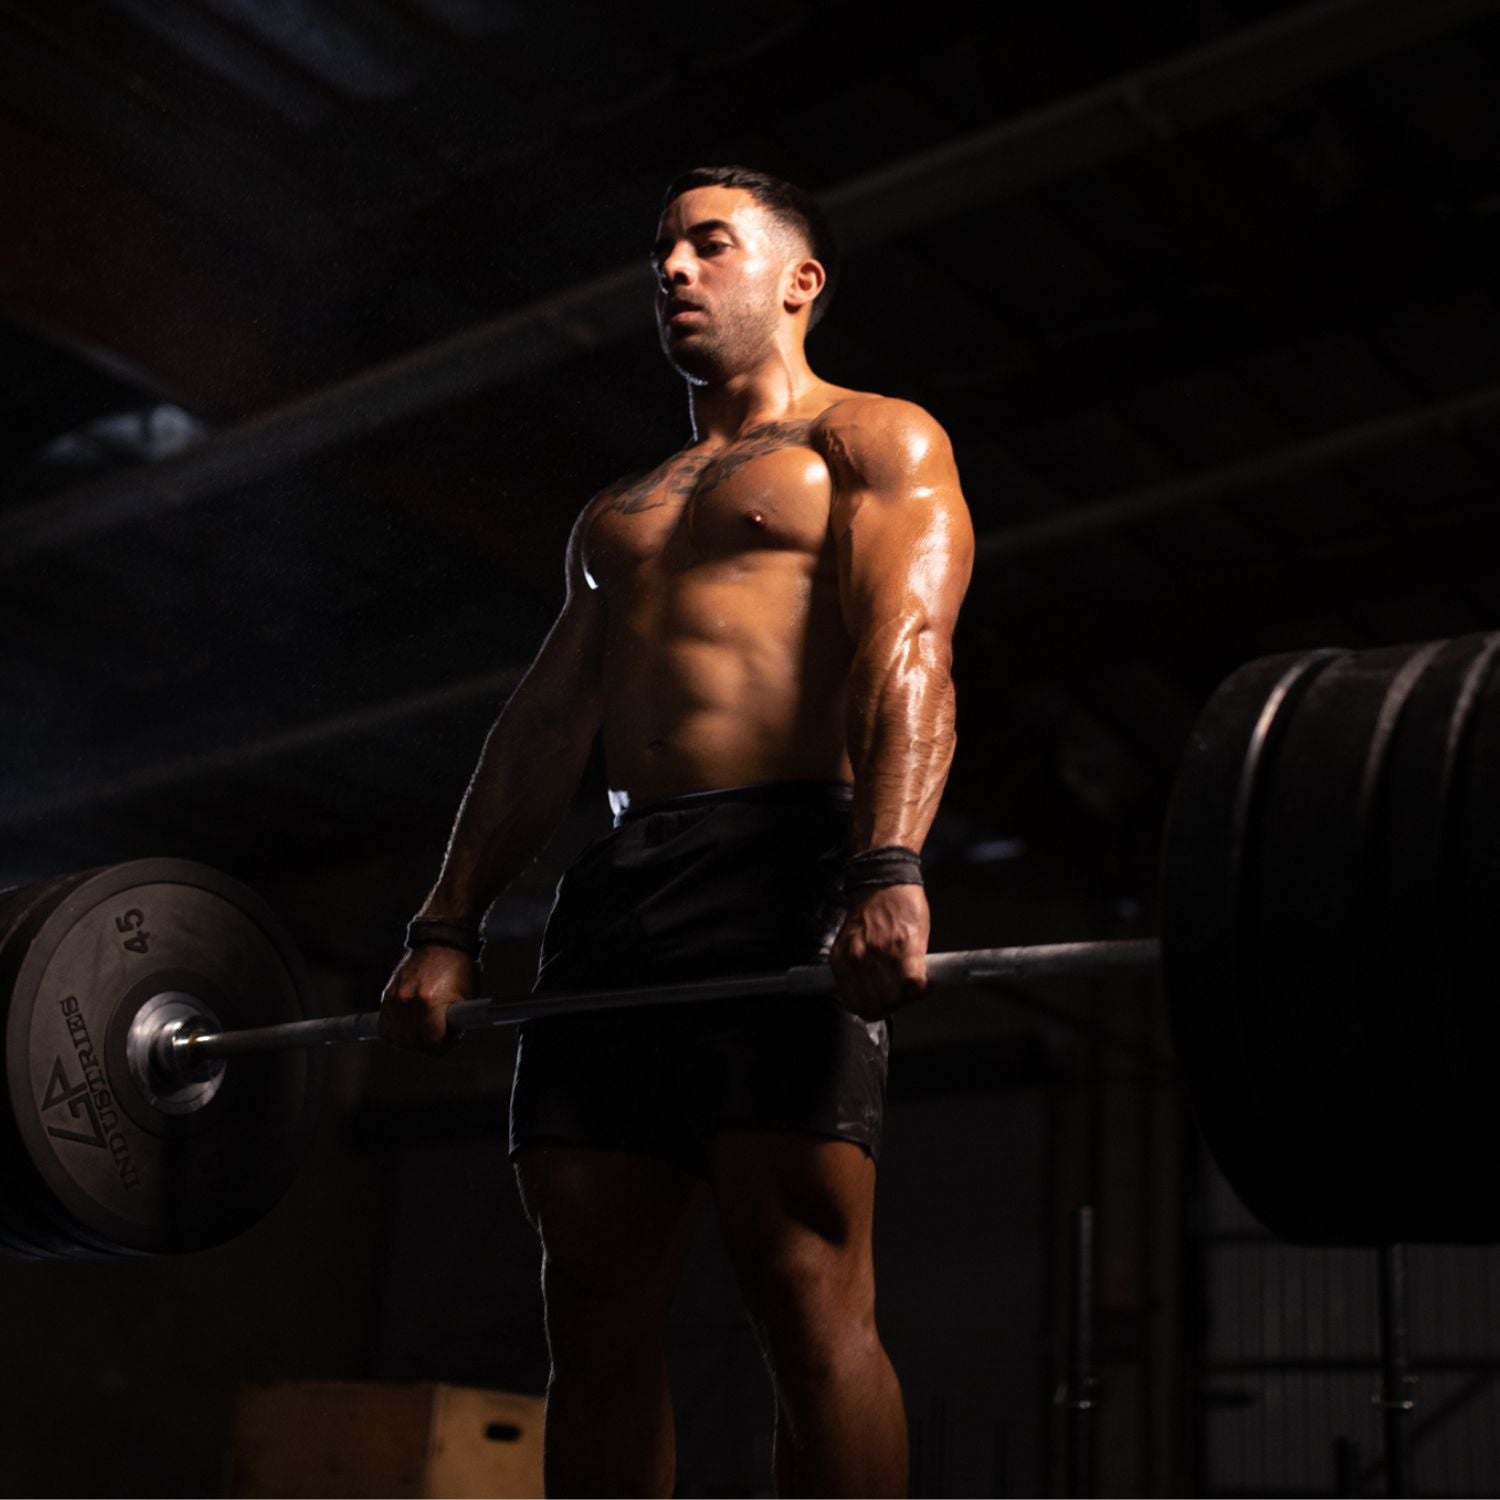 Fit athlete deadlifting a heavy barbell in a dark gym